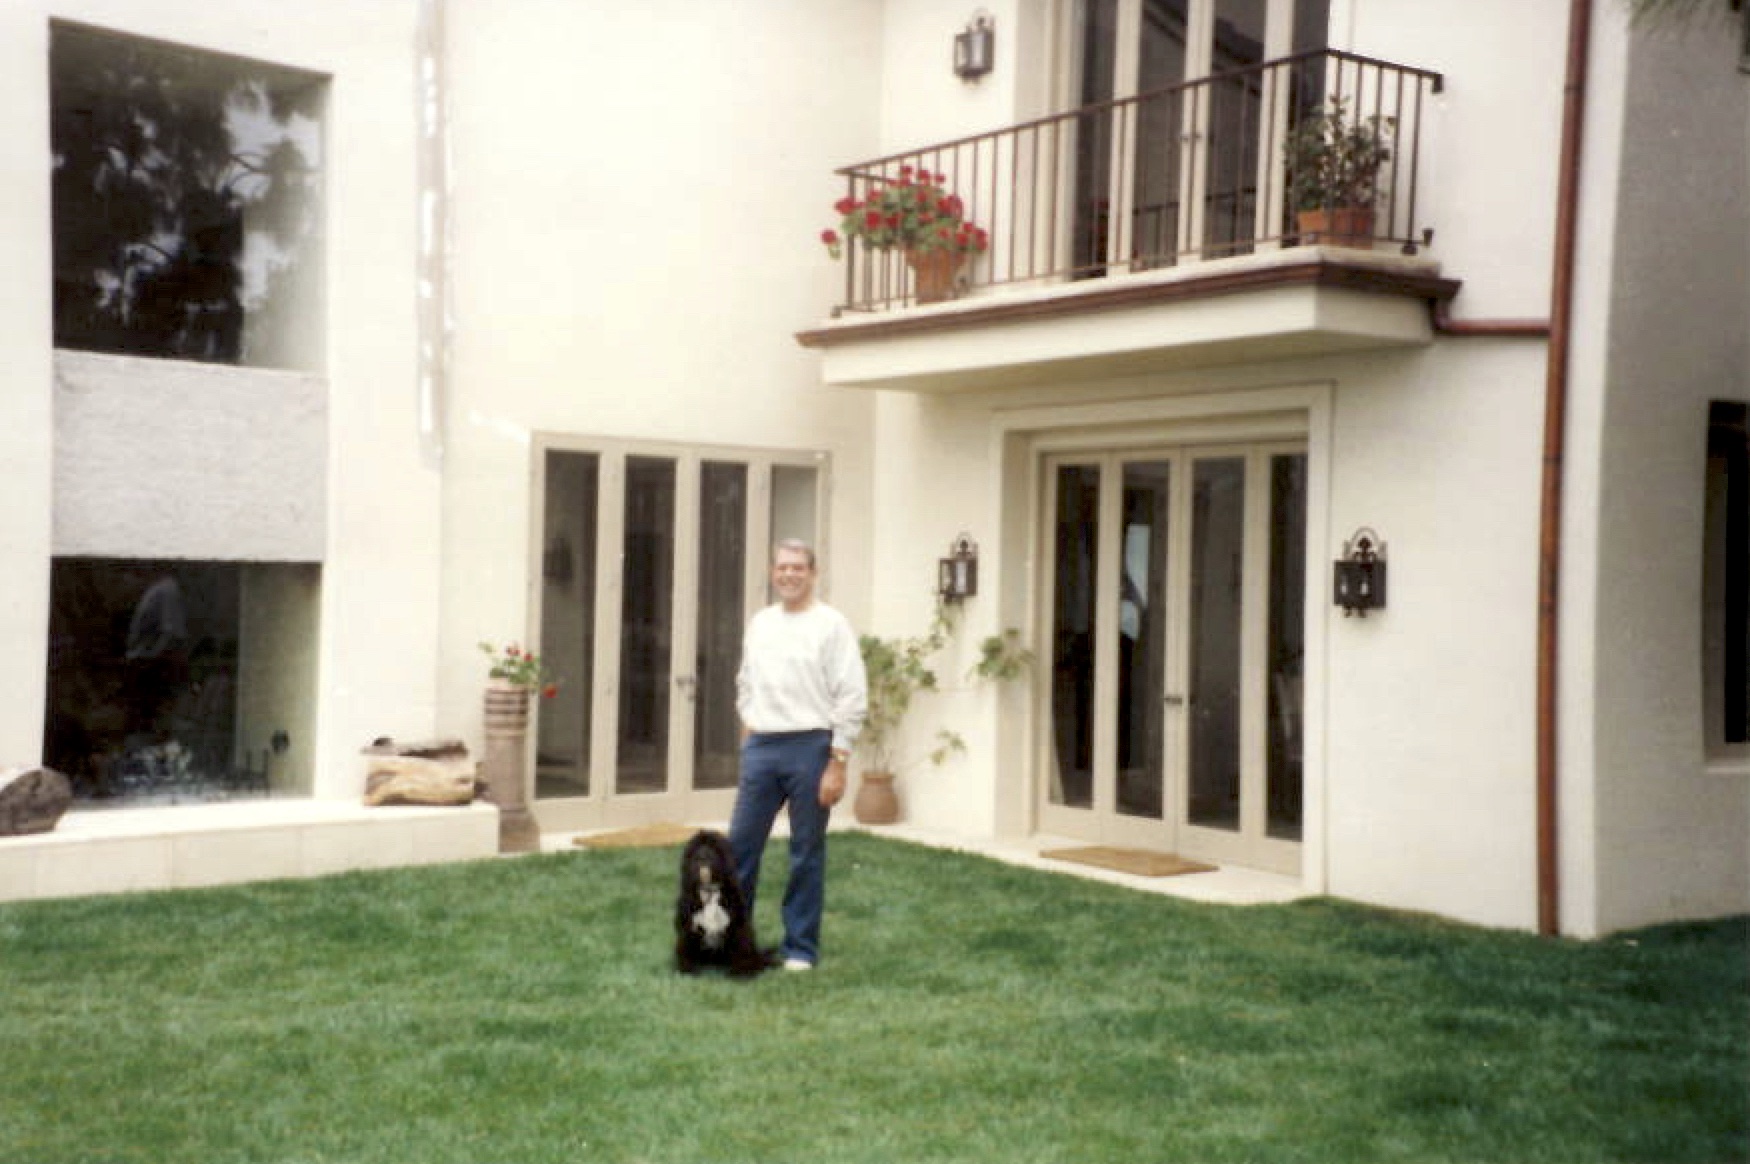 Chuck with his dog at his house in Malibu, CA.